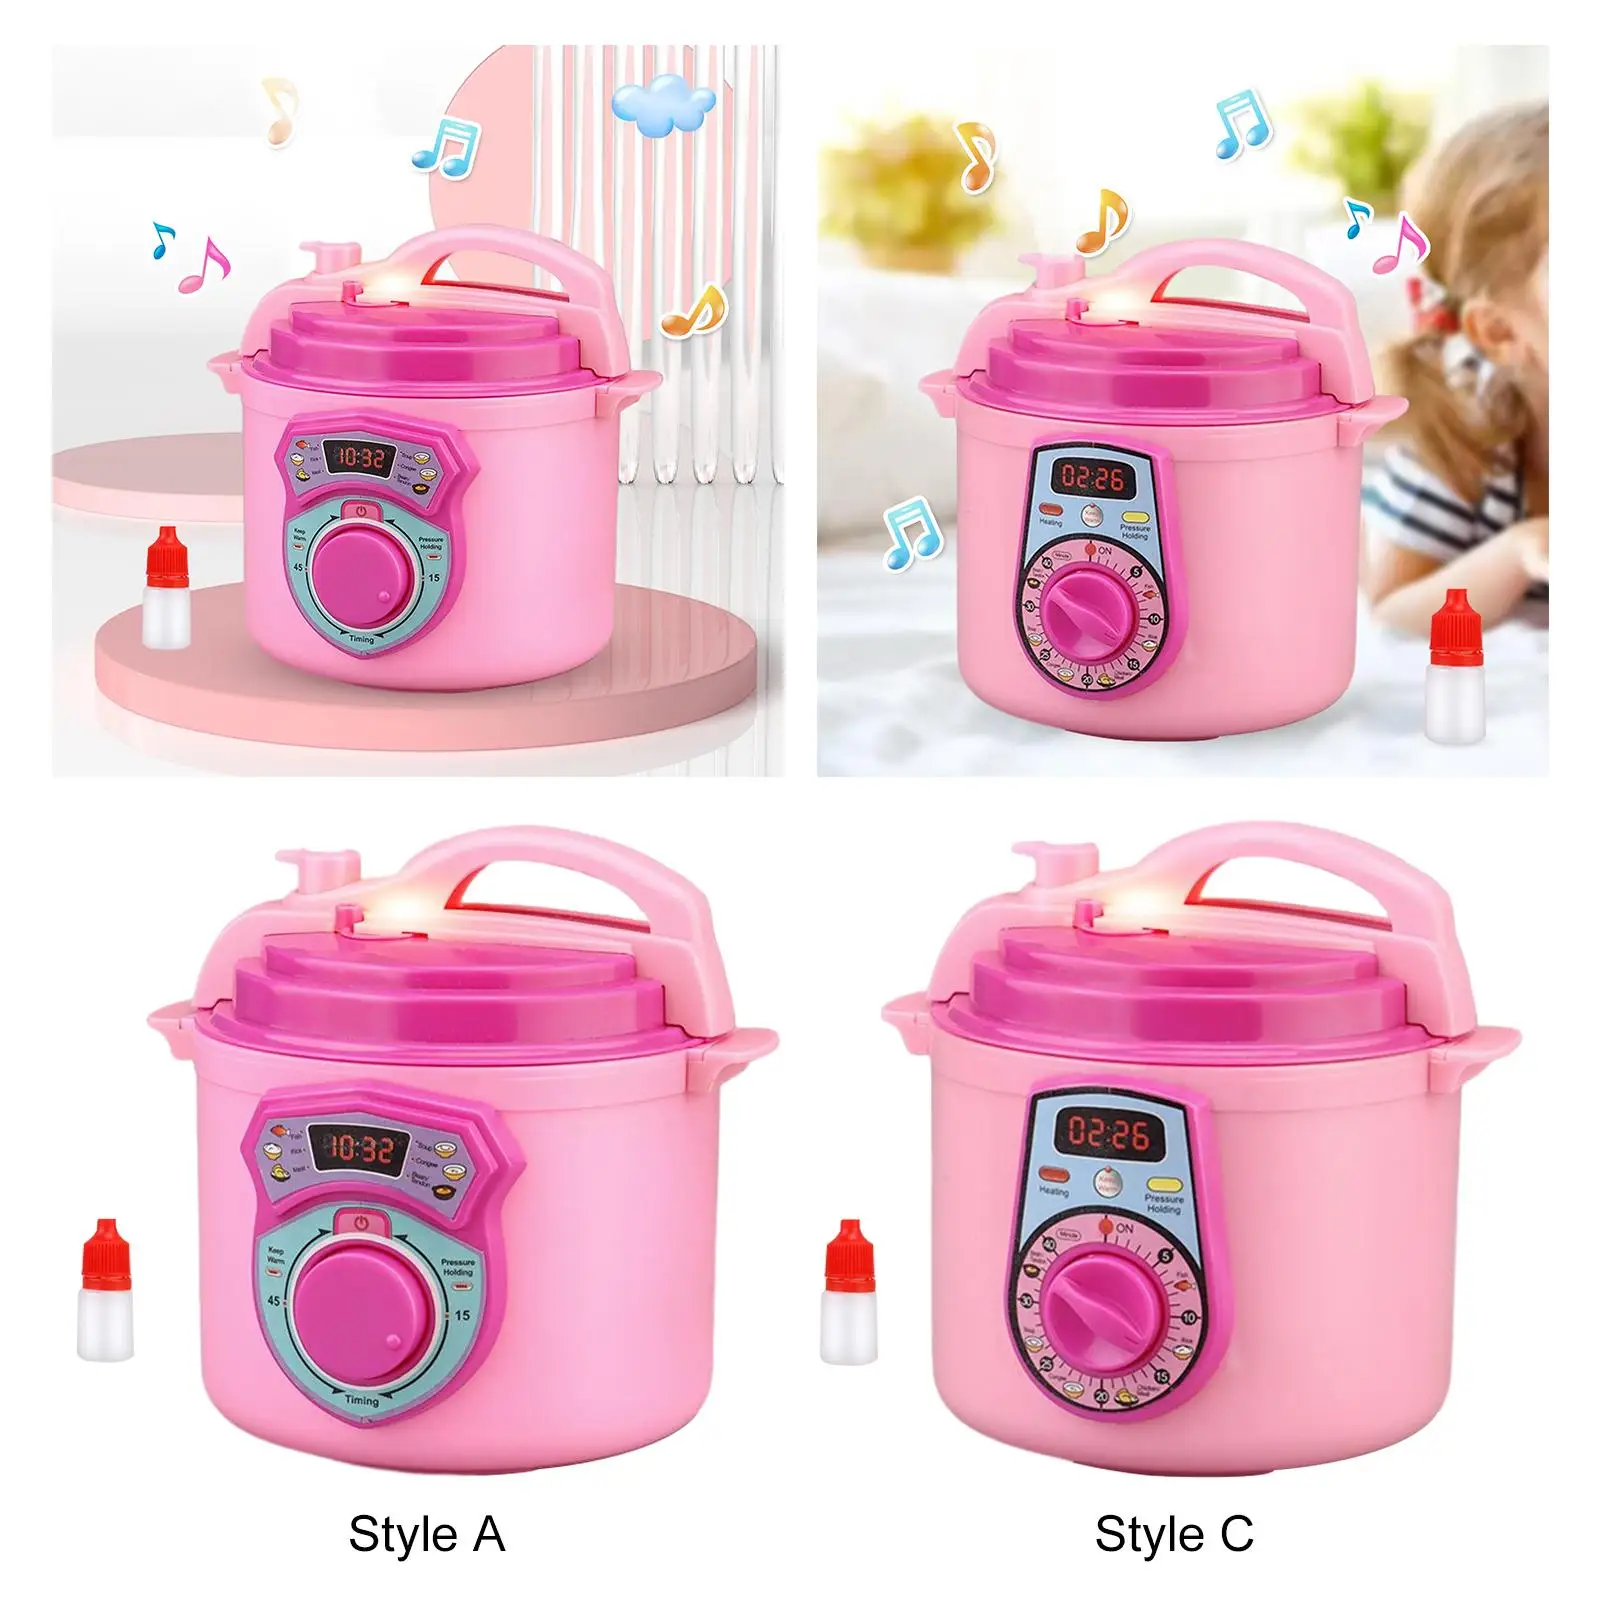 Electric Rice Cooker Toy Early Learning Educational Toy Cooking Toy for Kids